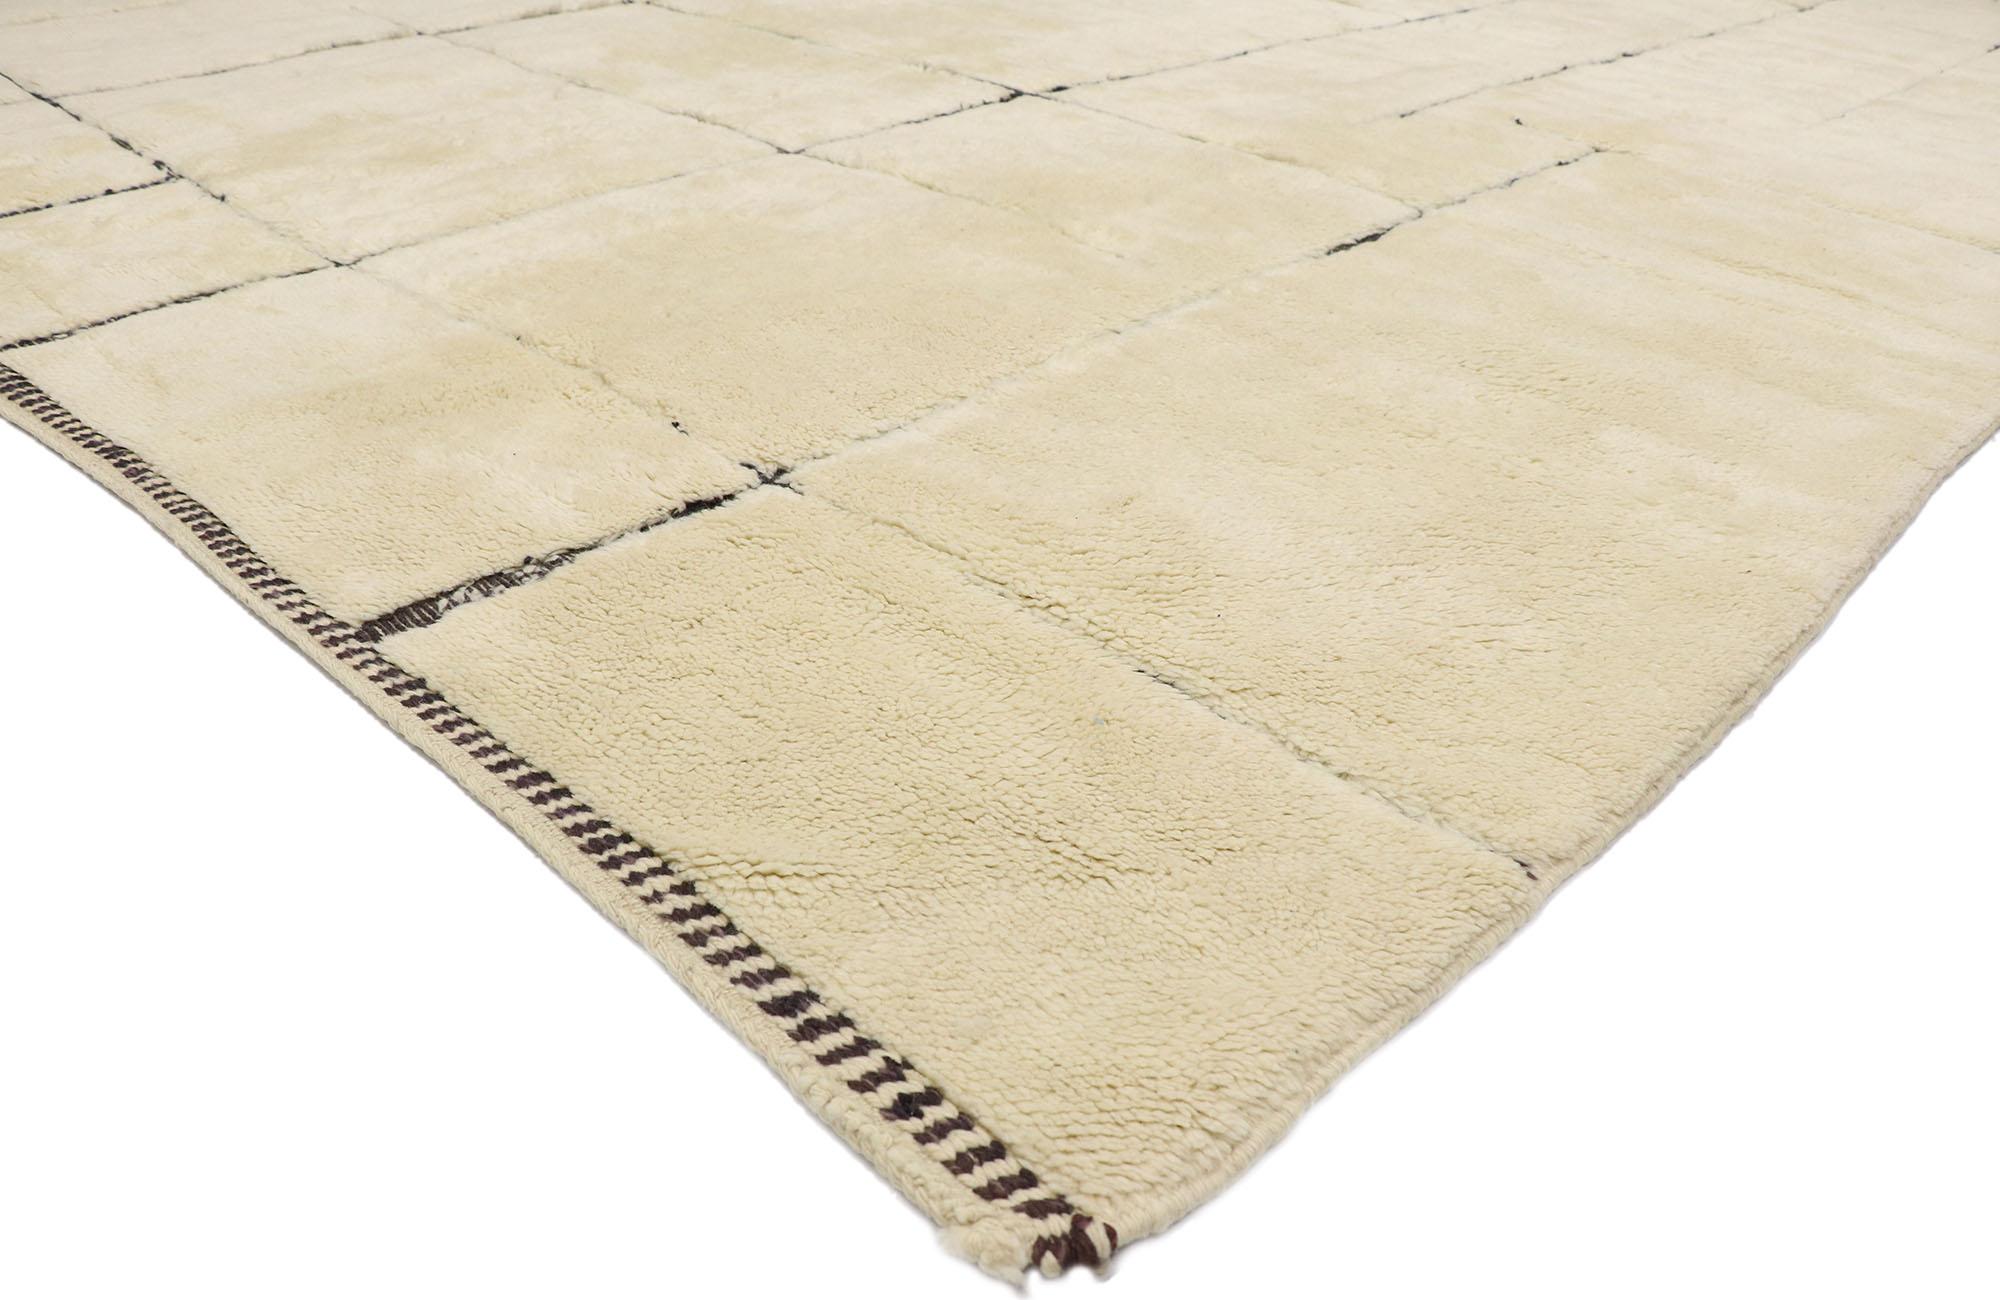 21163 New Contemporary Berber Moroccan Rug with Minimalist Bauhaus Style 09'10 x 12'09. With its simplicity, plush pile and Bauhaus style, this hand knotted wool contemporary Moroccan rug provides a feeling of cozy contentment without the clutter.